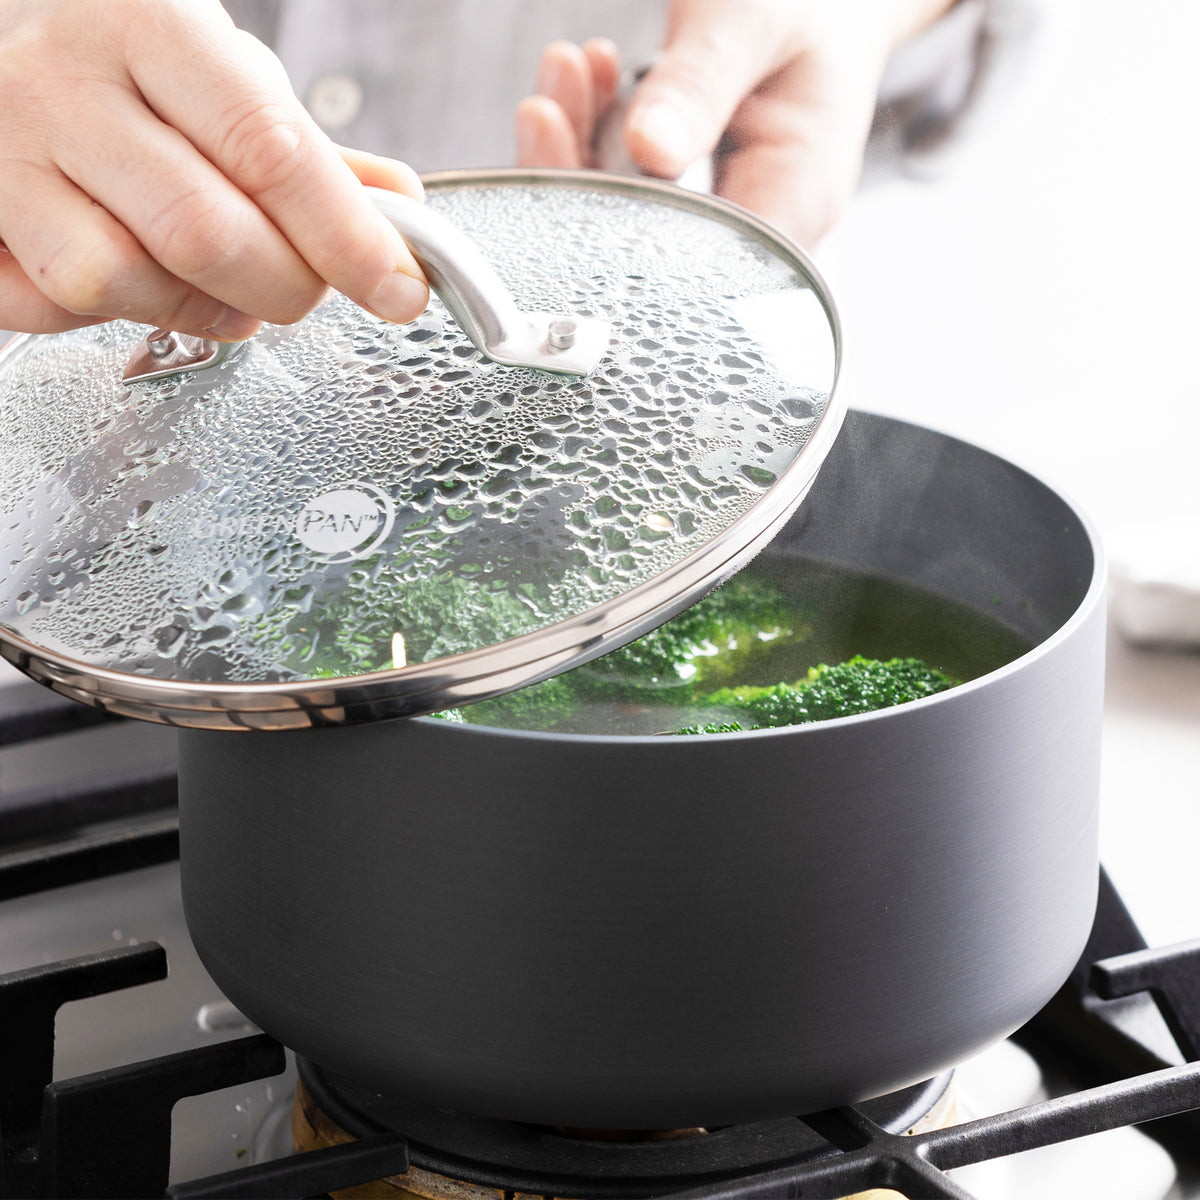 GreenPan Lima Ceramic Nonstick Cookware Review: For New Cooks